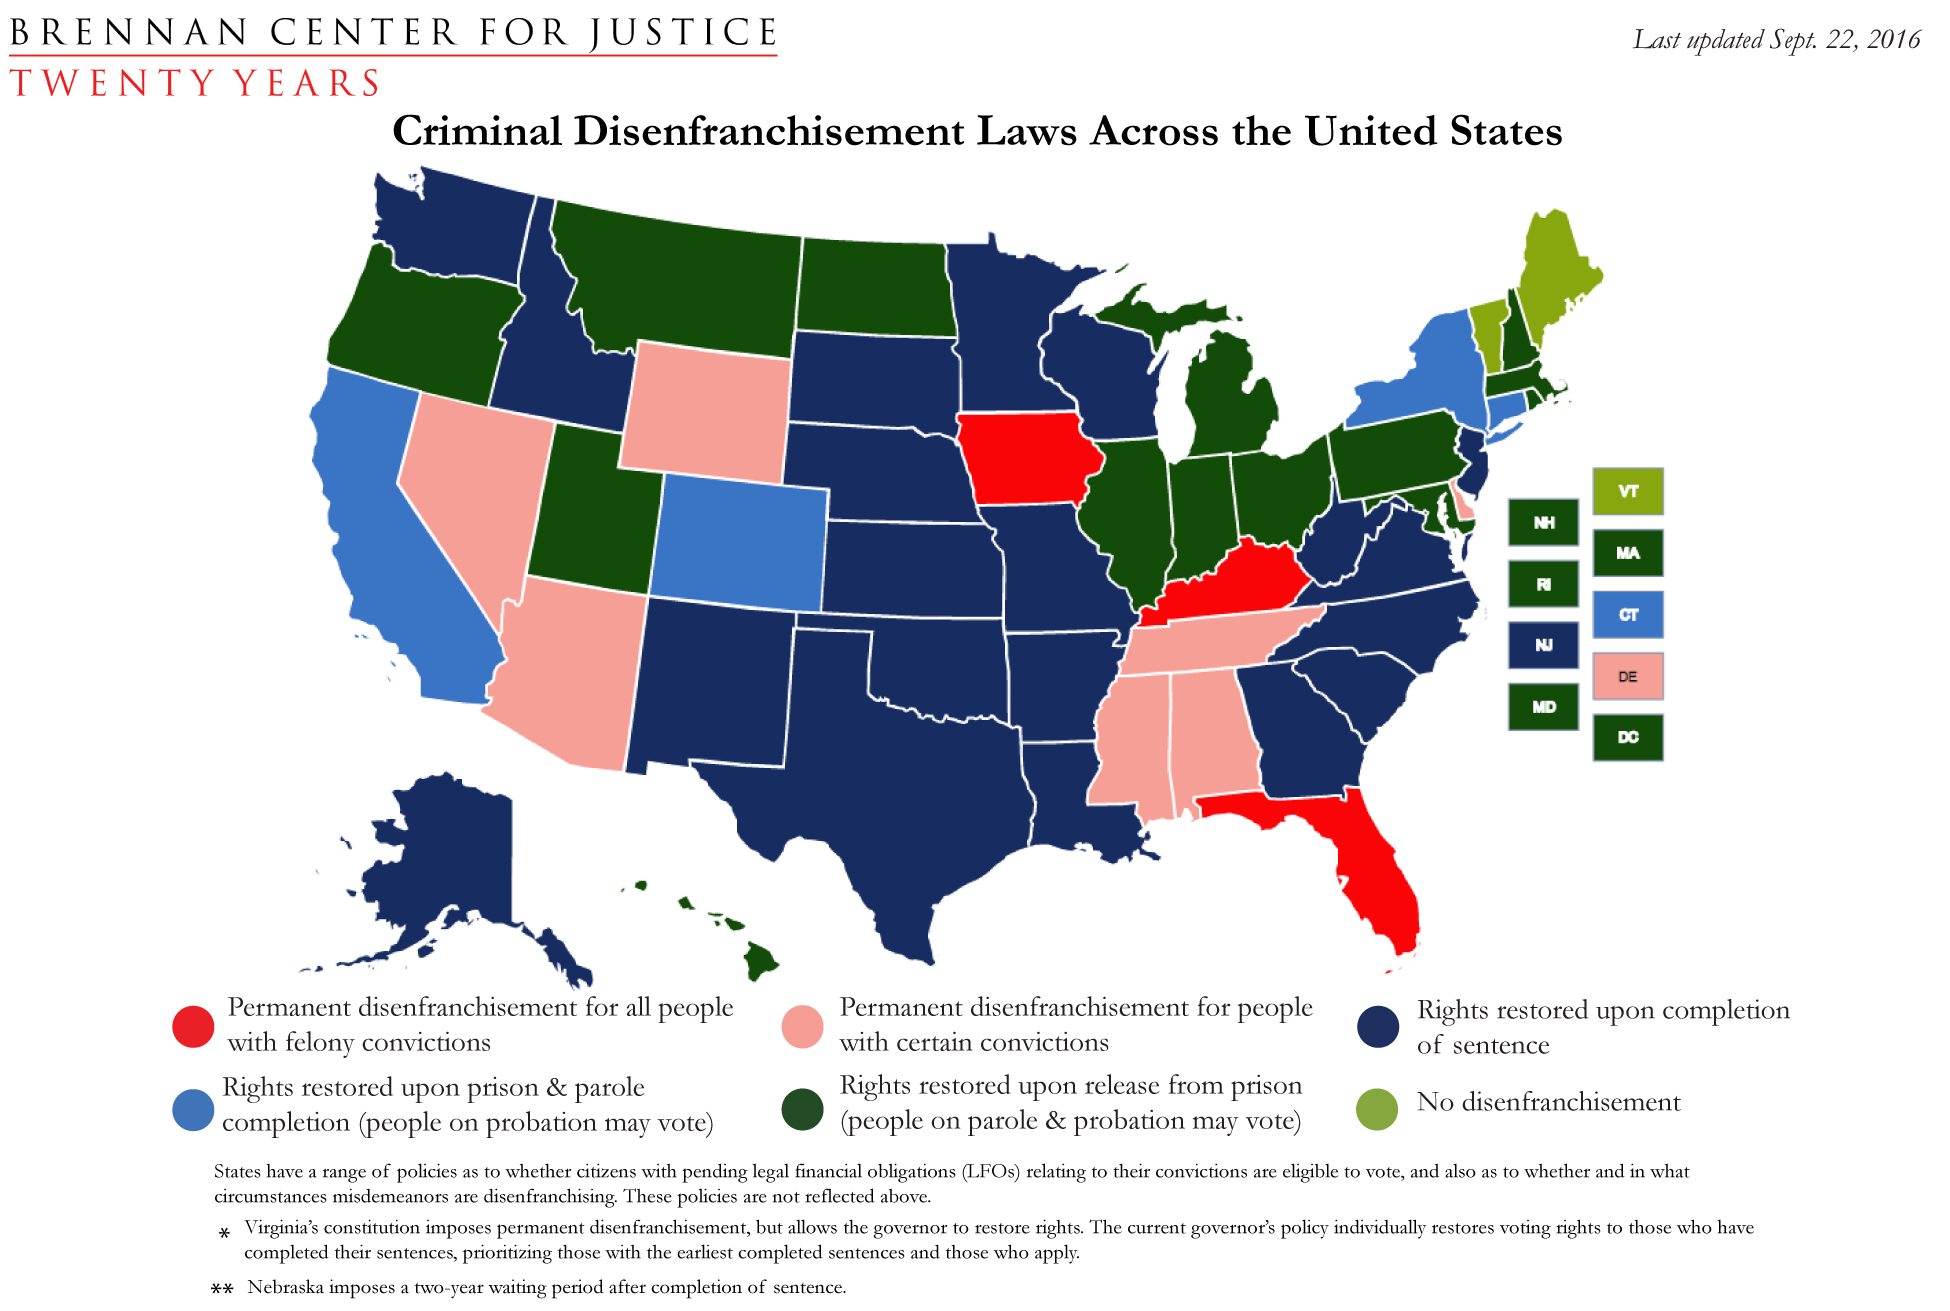 What are some prisoner rights in the USA?